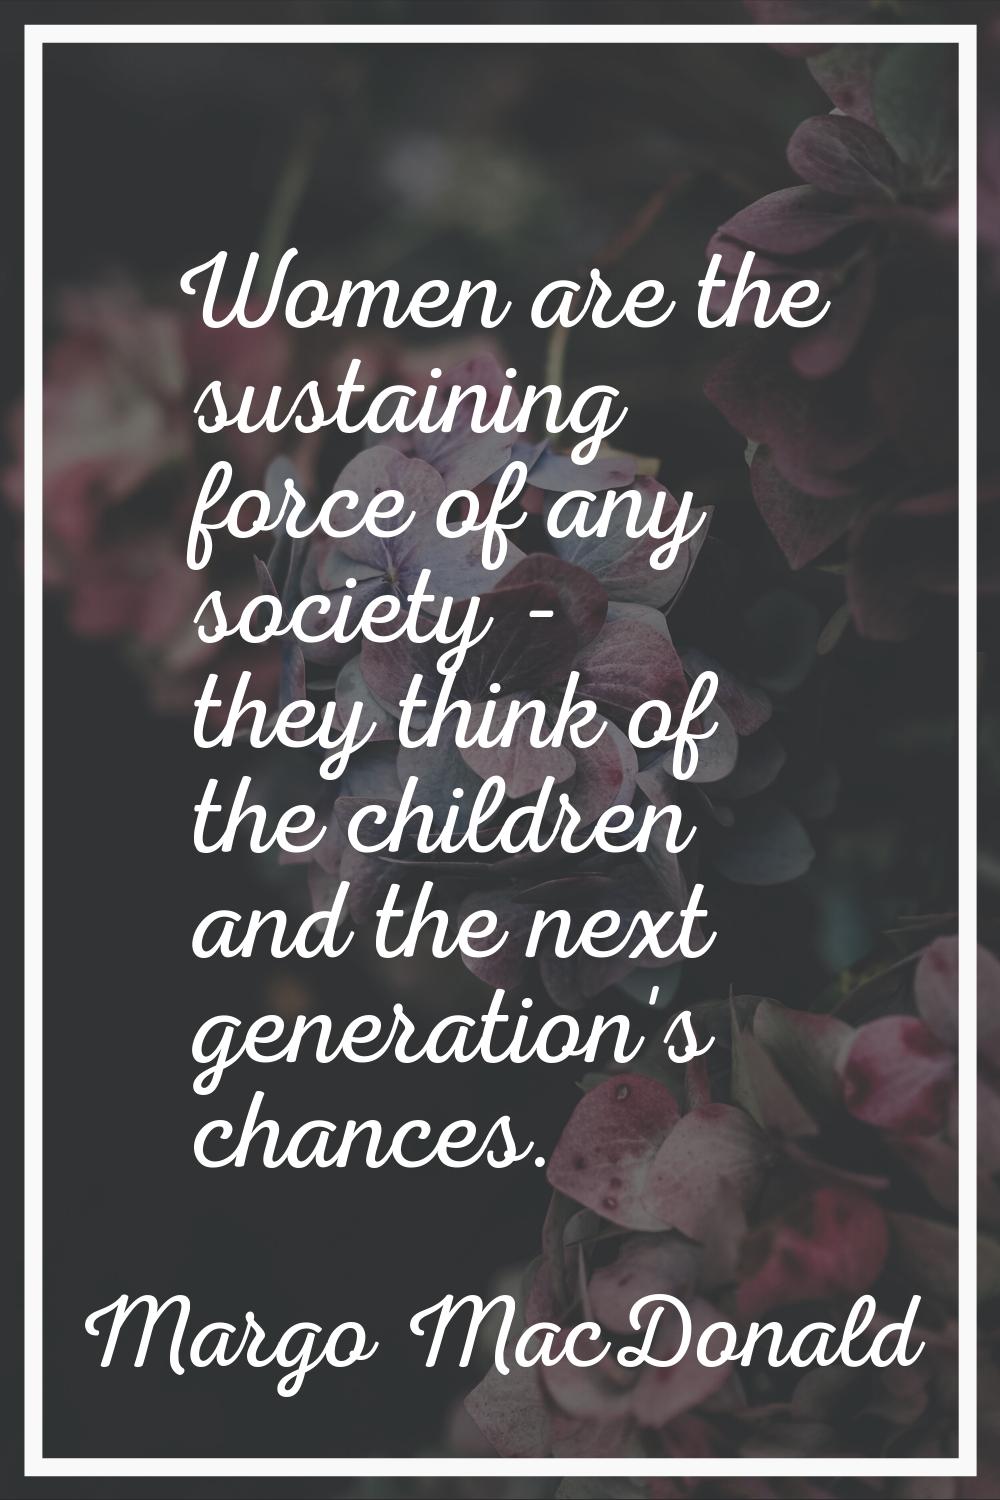 Women are the sustaining force of any society - they think of the children and the next generation'